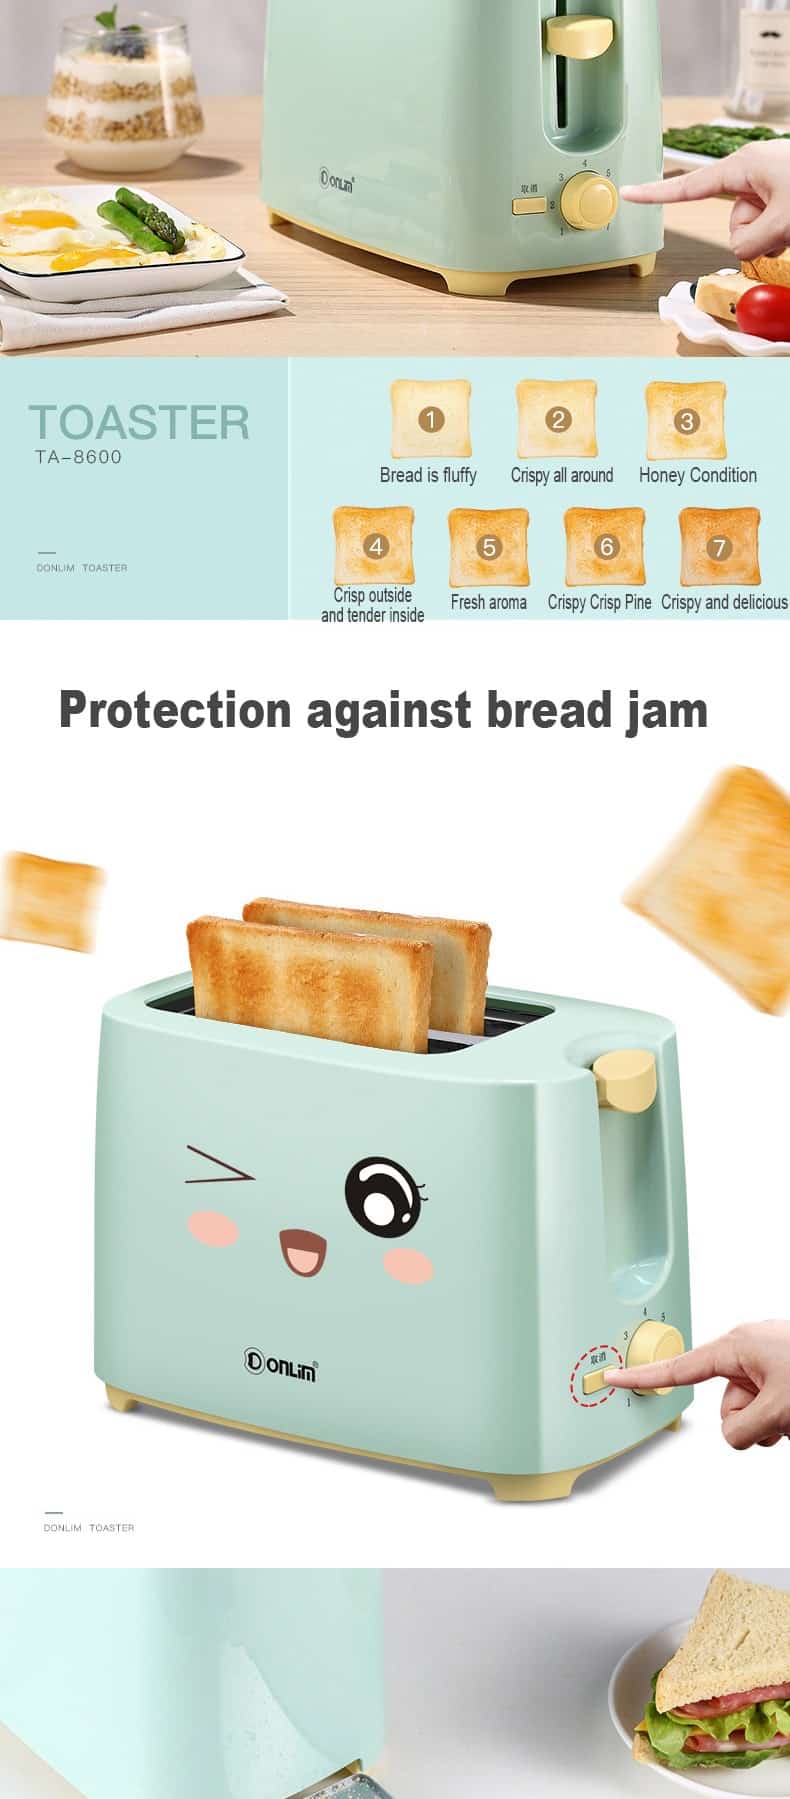 Mini Automatic Bread Maker Sandwich Kitchen Appliances Cooking Fry 2- Slice Electronic 750W Fast Toaster Home Breakfast Machine